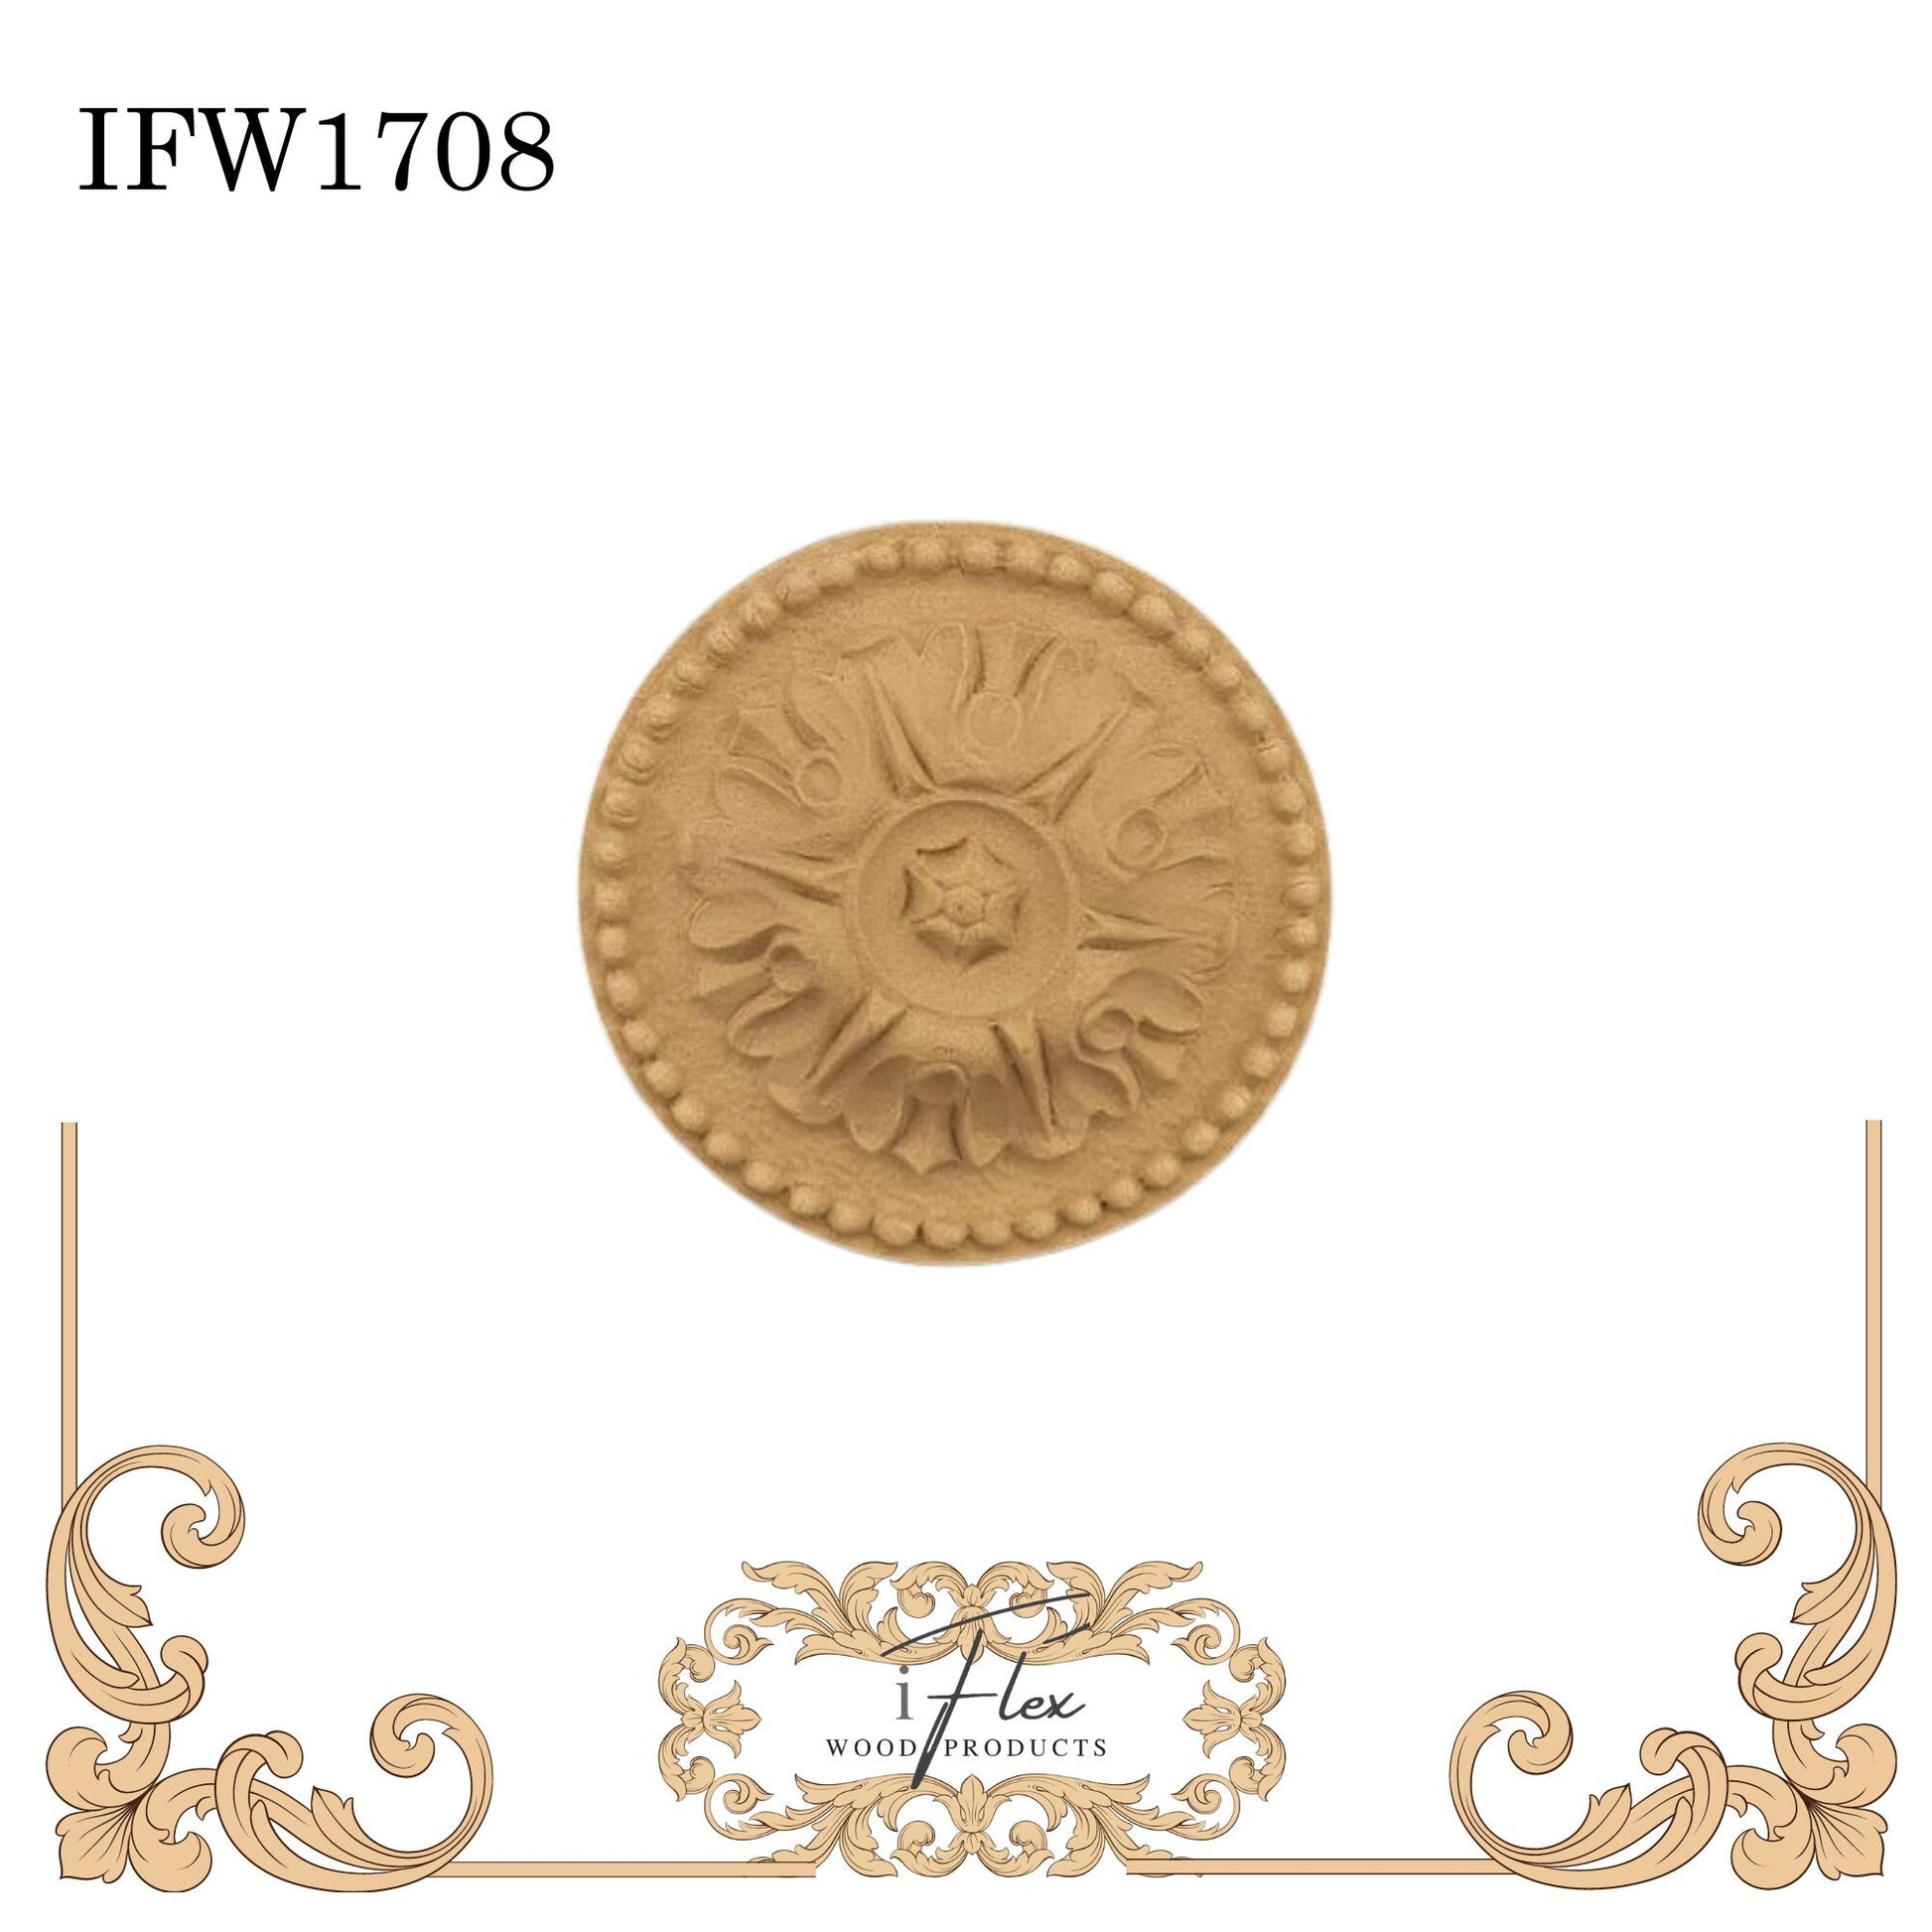 IFW 1708 iFlex Wood Products, bendable mouldings, flexible, wooden appliques, centerpiece